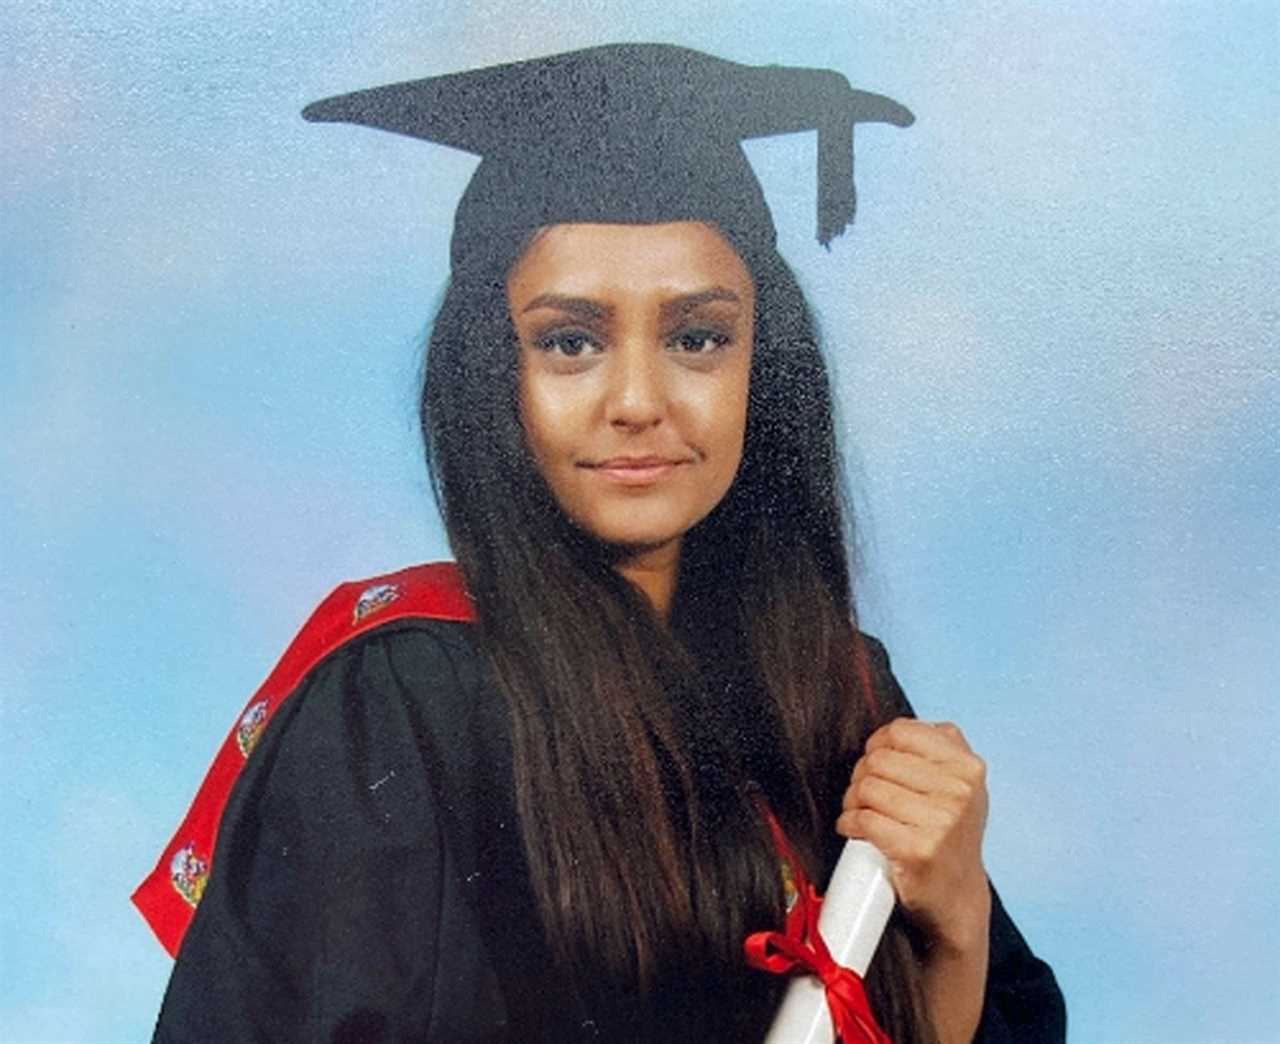 Criminals may be forced into court for sentencing after Sabina Nessa’s killer refused